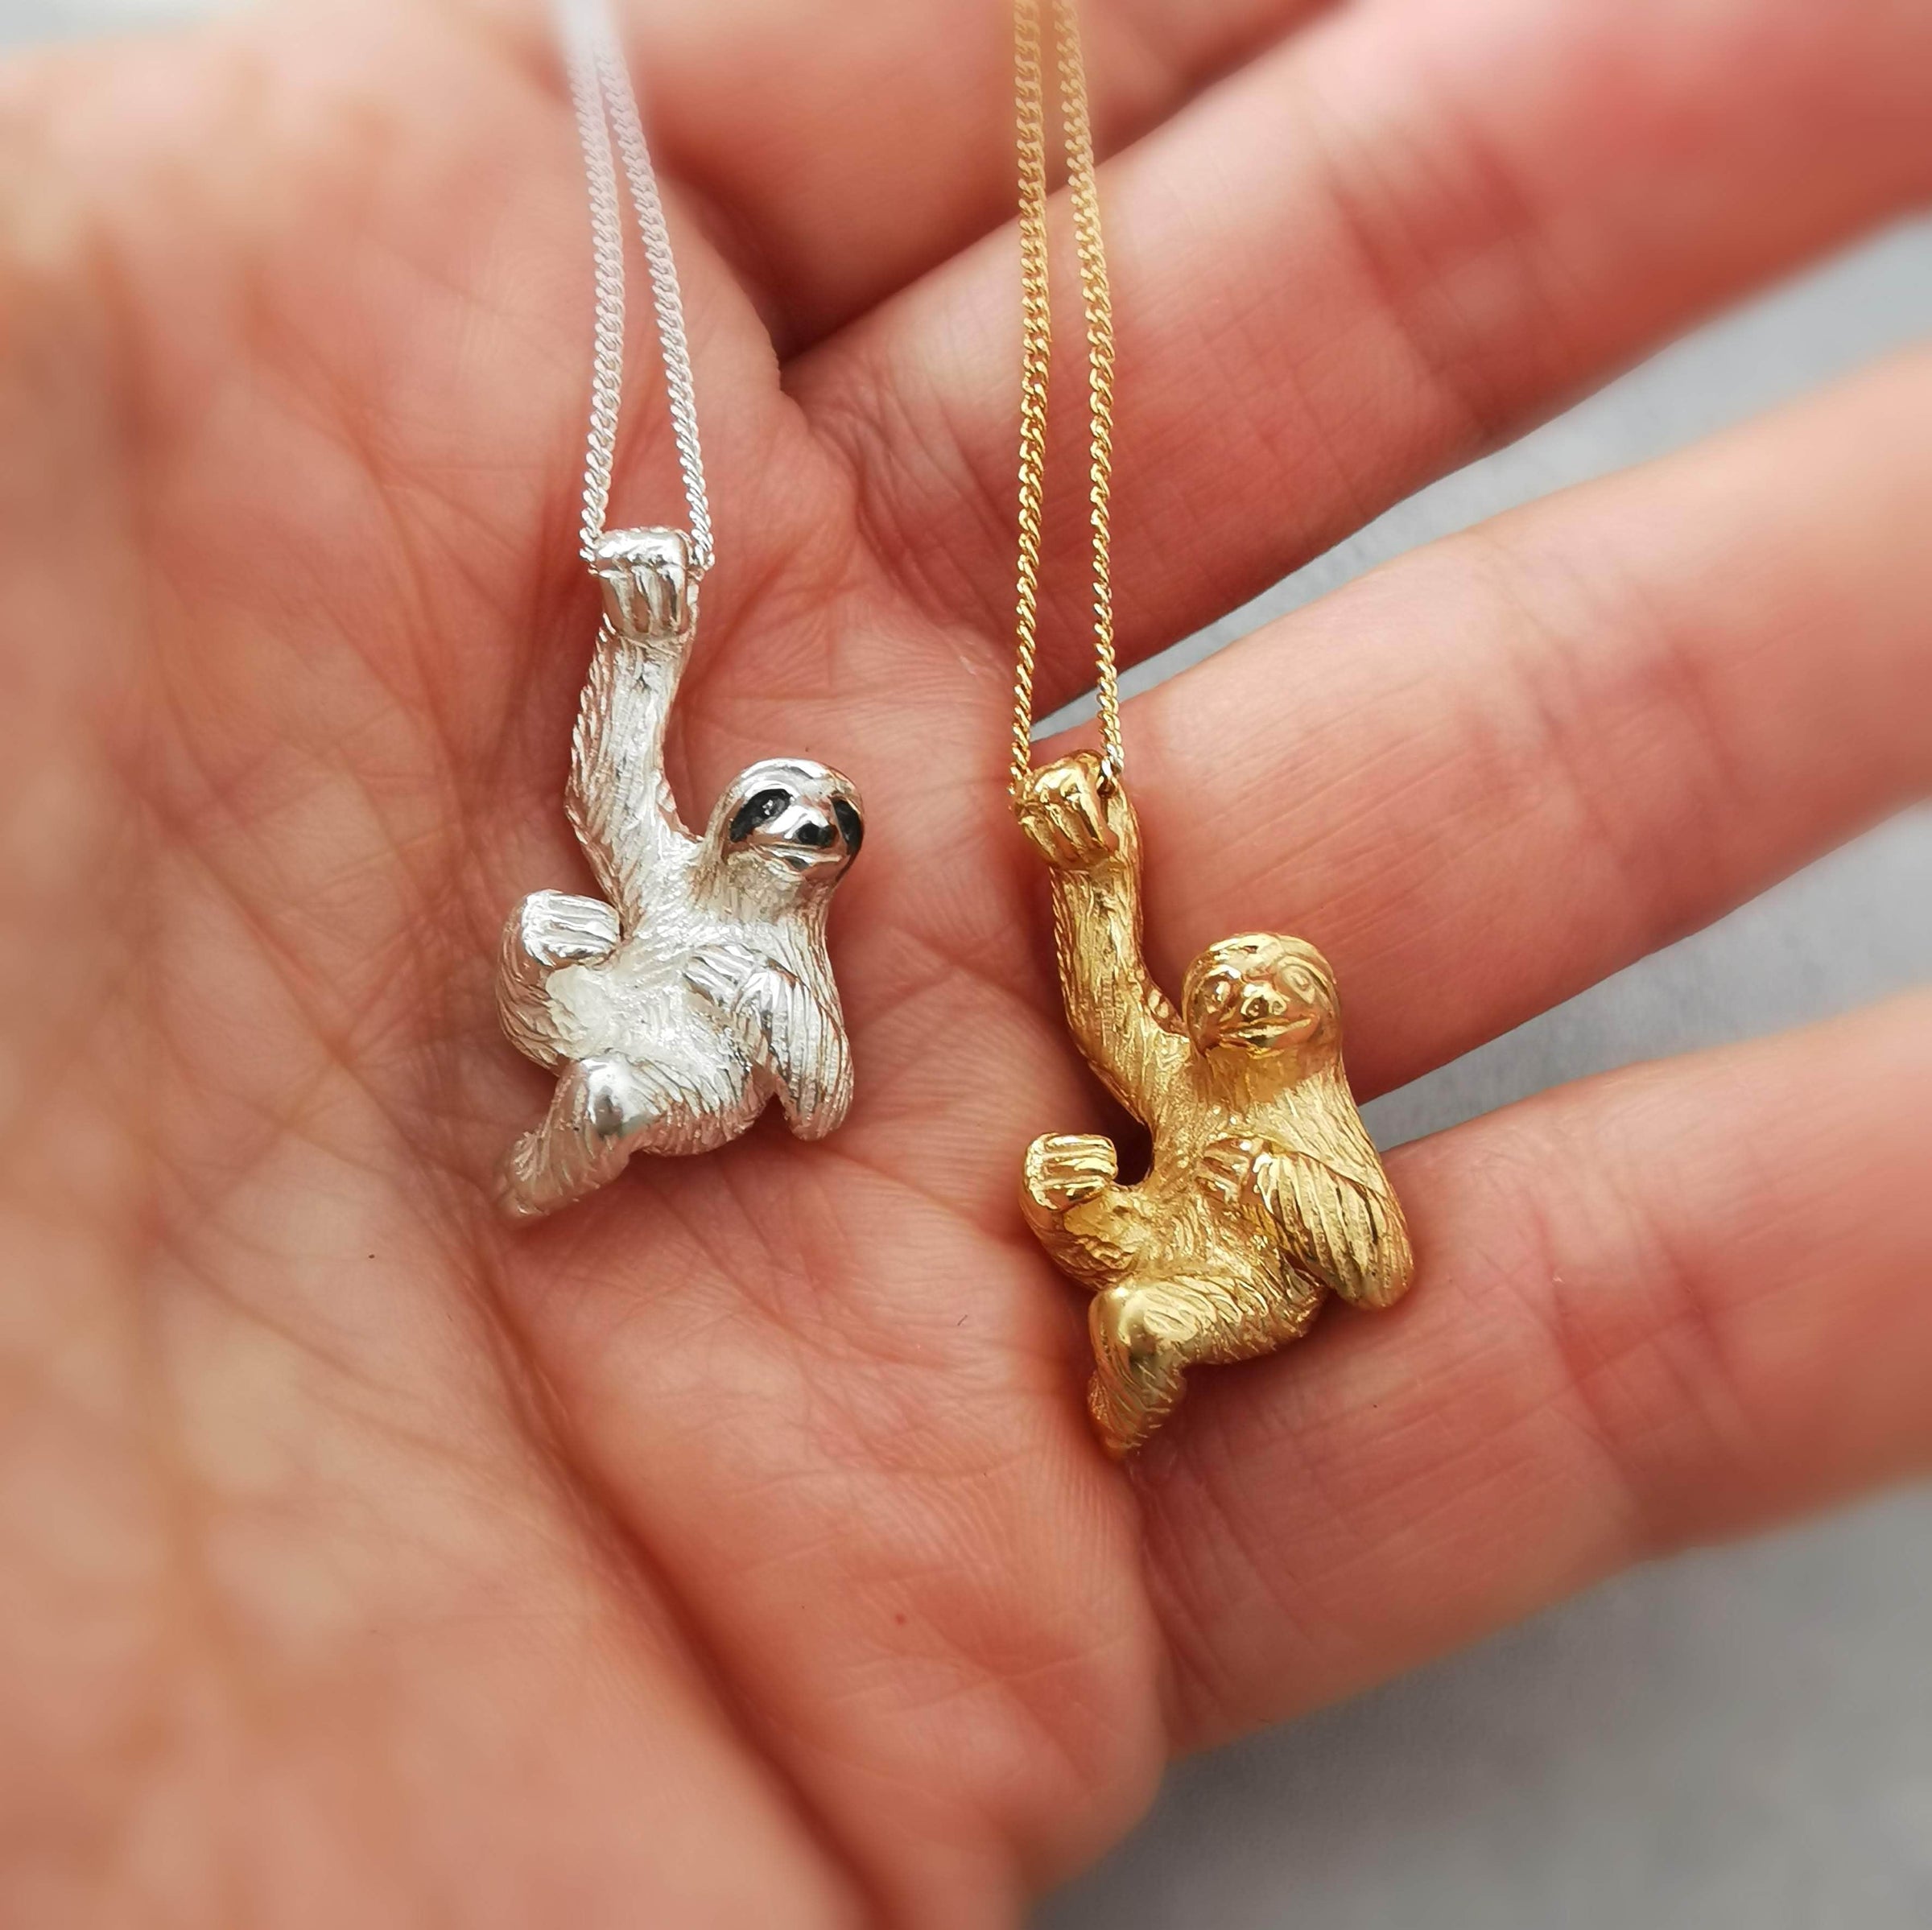 Jewelry Sloth Jewelry Gifts Sterling Silver Sloth Necklace Earings Heart  Sloth Jewelry for Women Men Girls Boys Christmas Gifts Jewelry Sets for  Women Metal B 